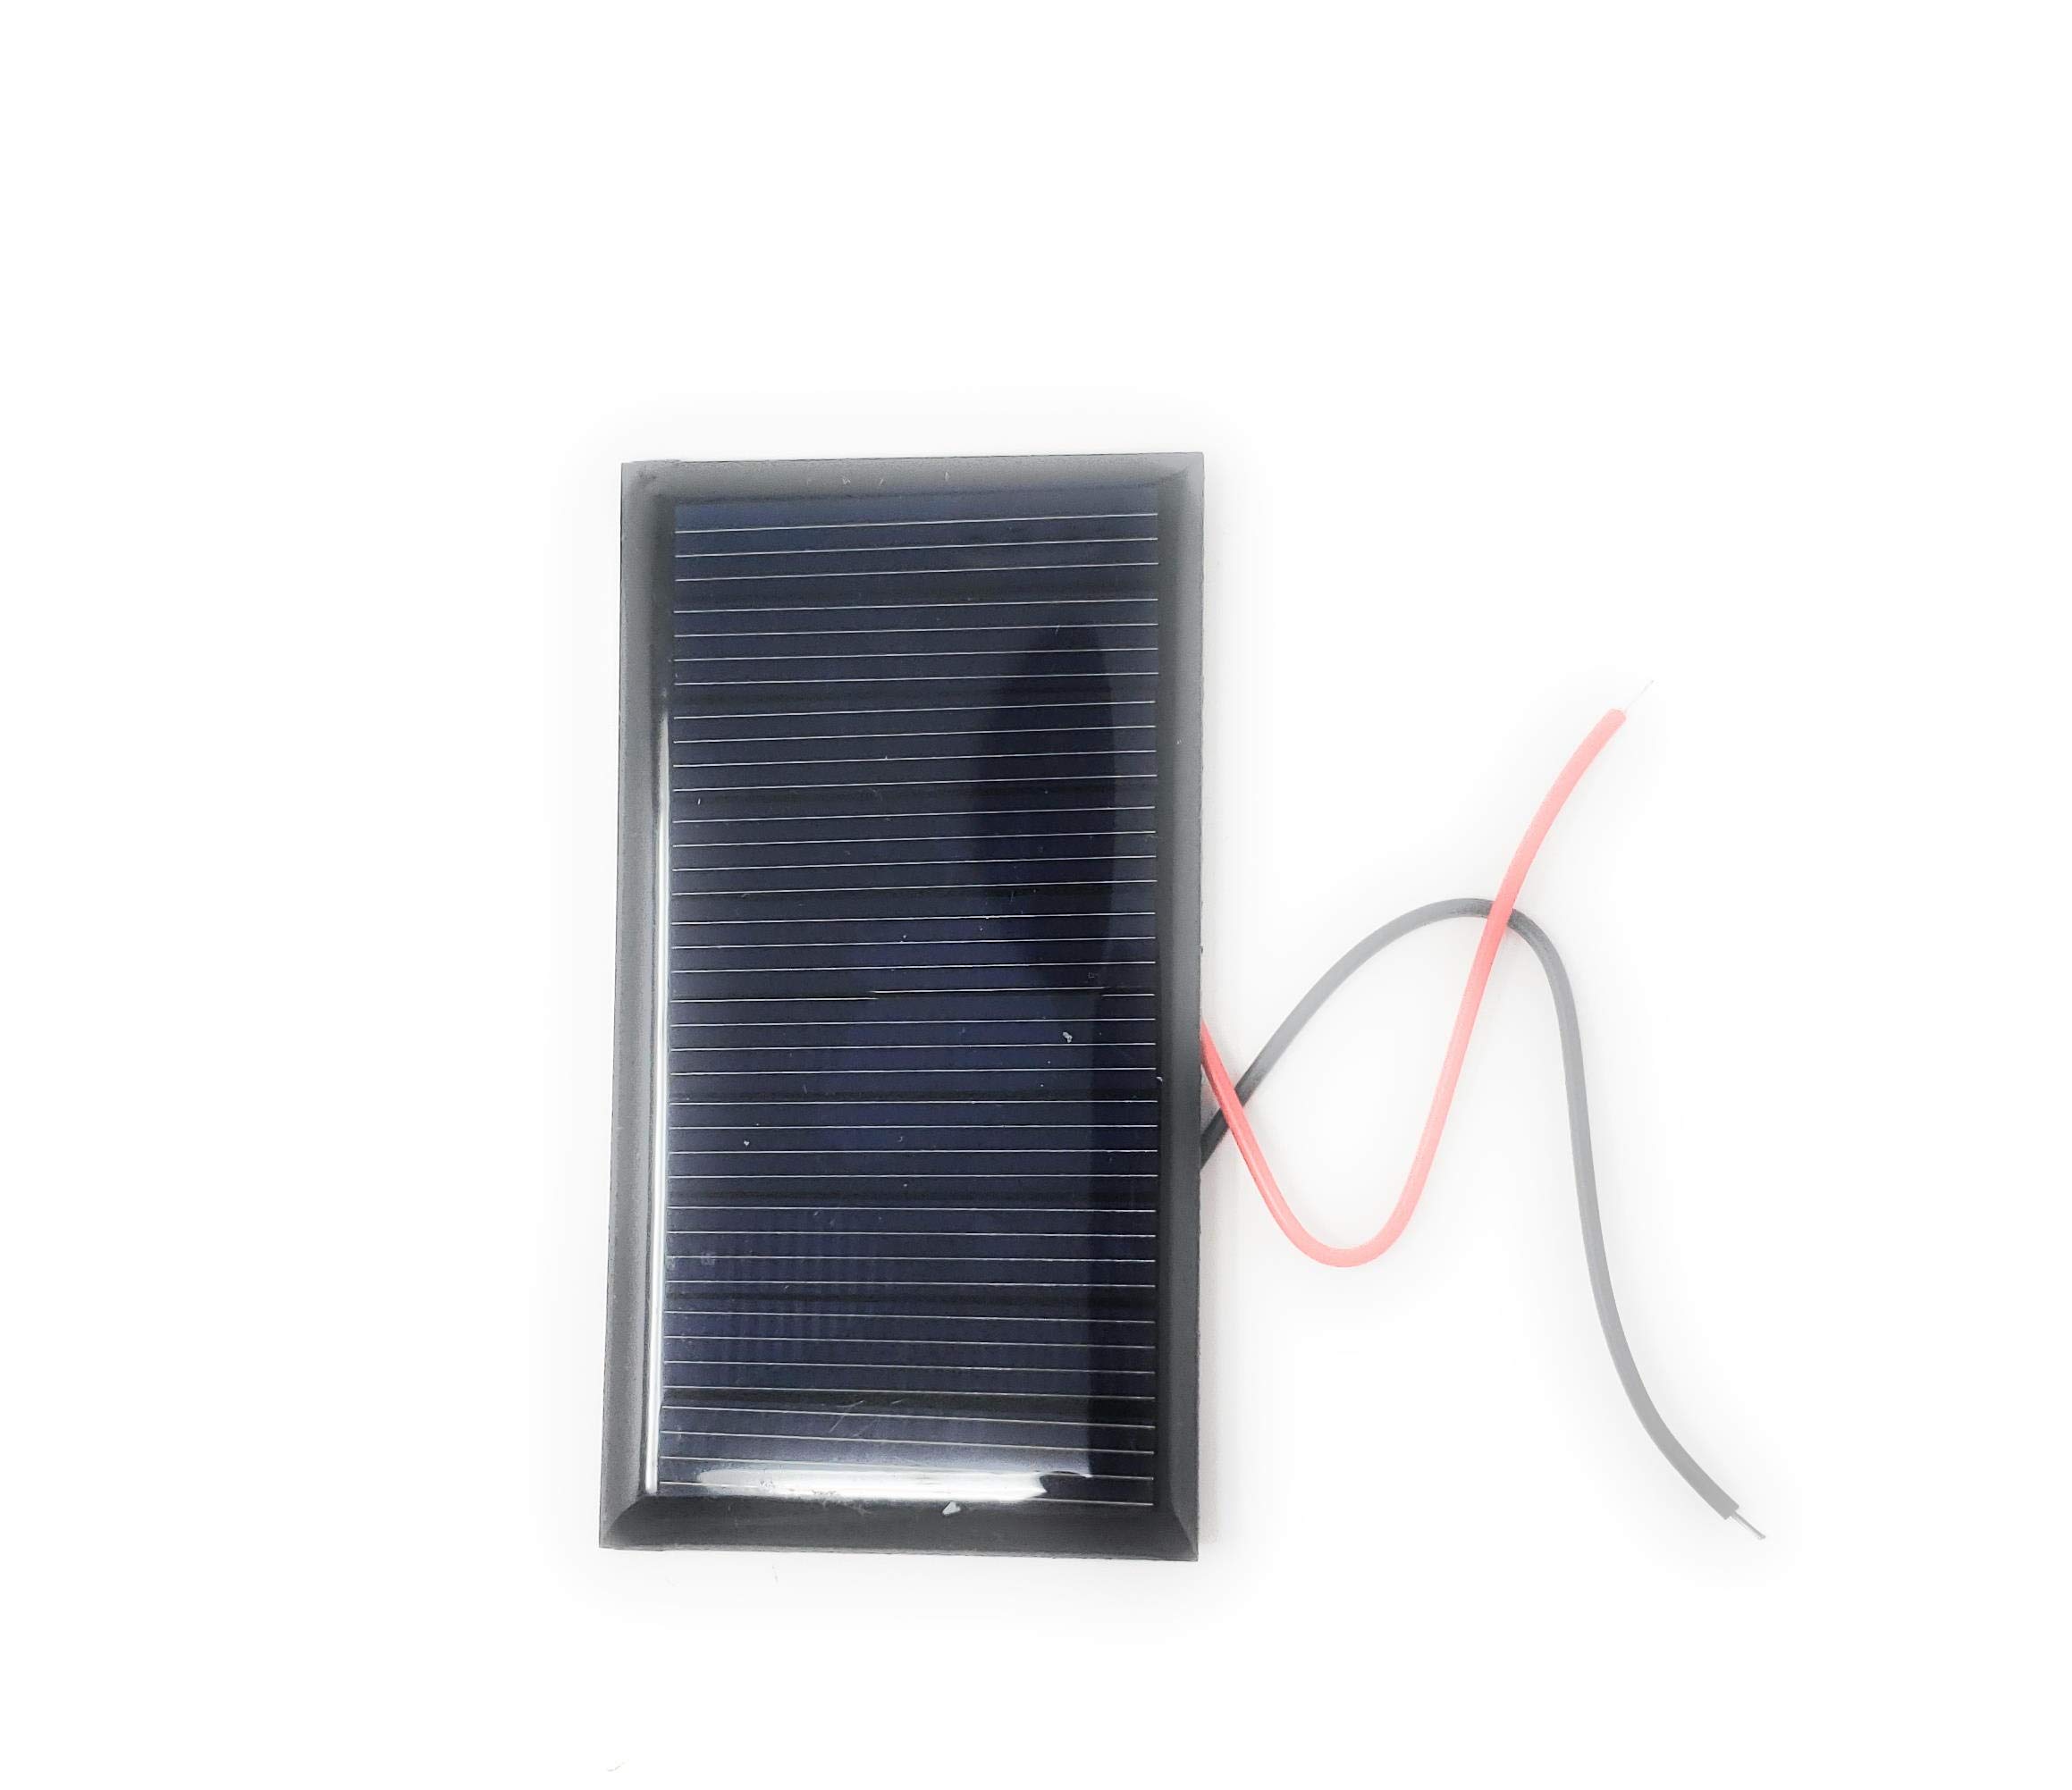 2X 5V 60mA 68x37mm Micro Mini Power Solar Cells for Solar Panels - DIY Projects - Toys - 3.6V Battery Charger (2 pcs)